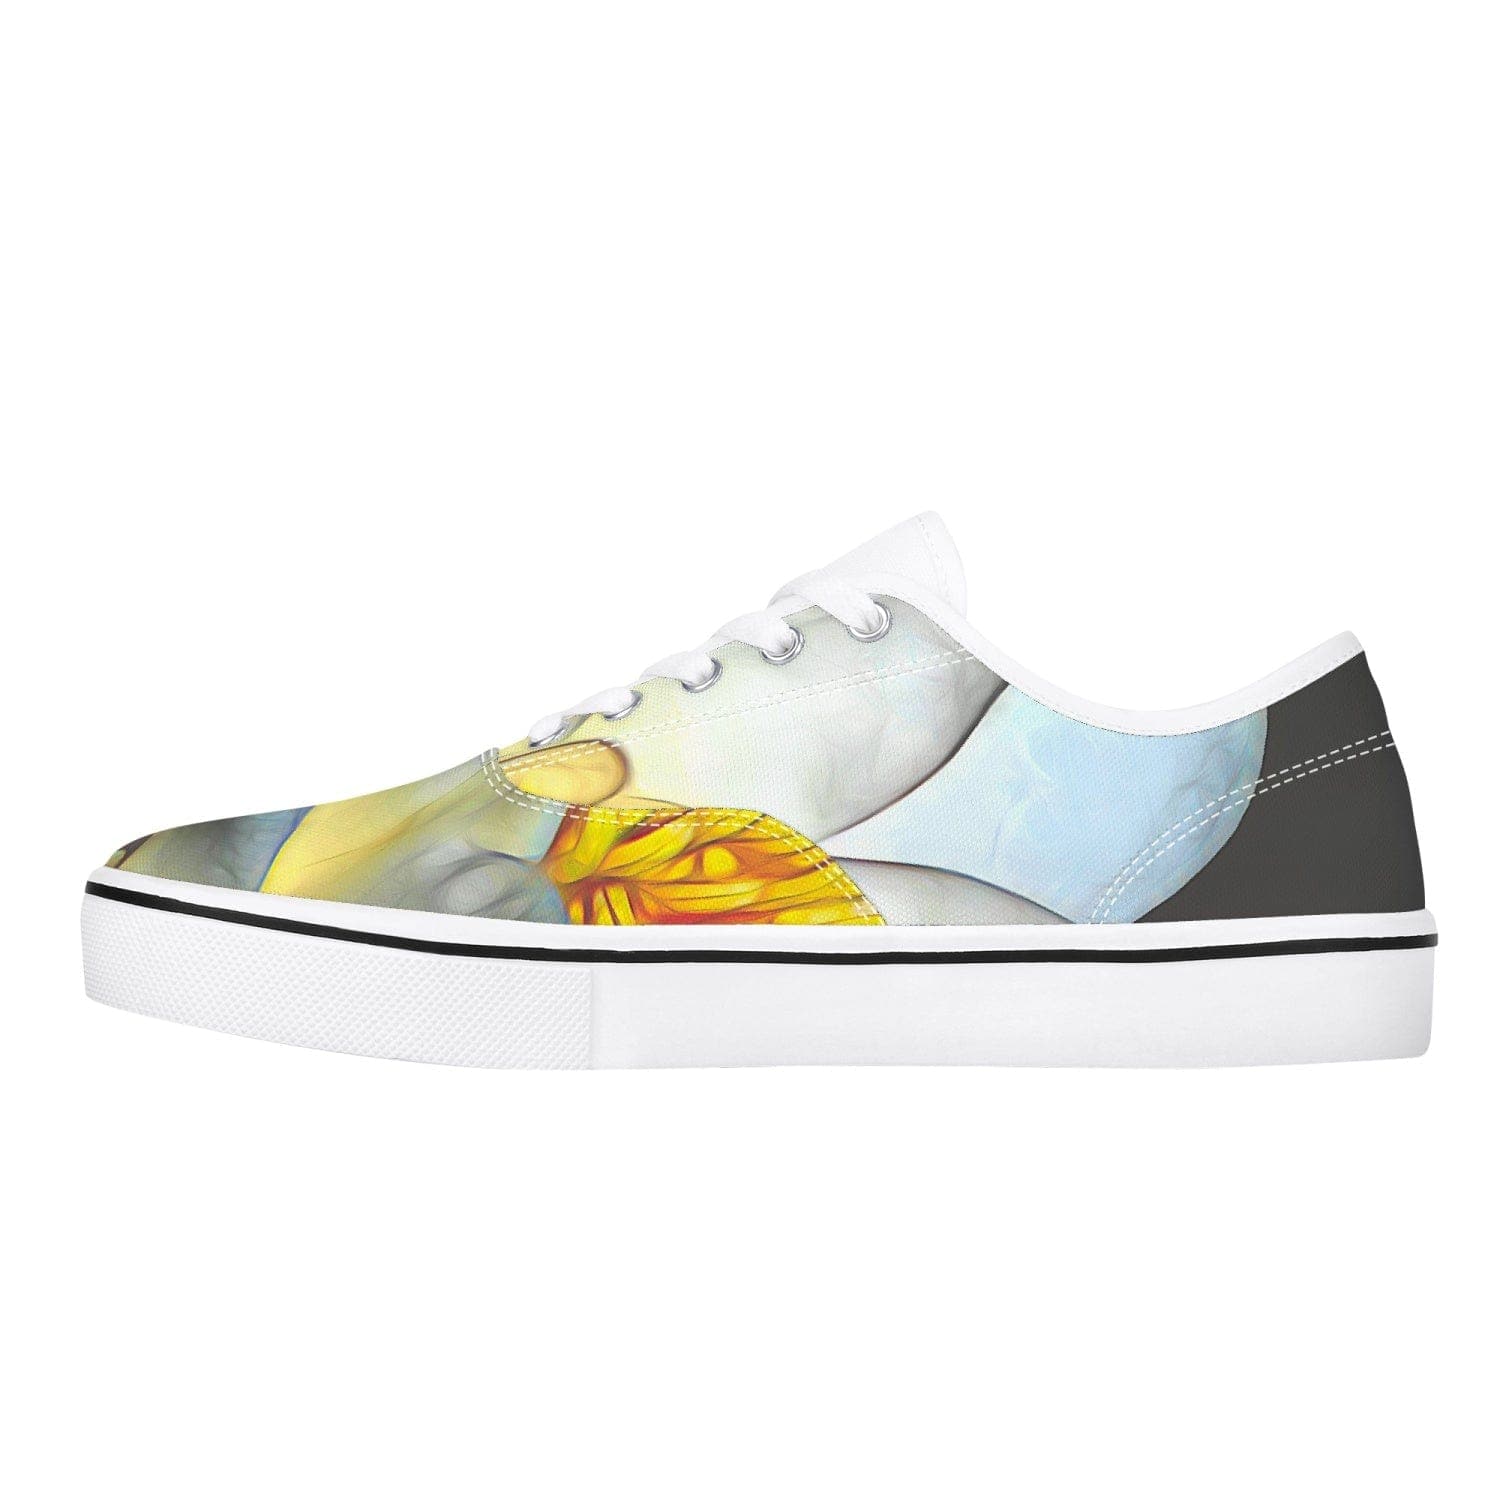 Water lilly. Skate Shoes - White/Black, designed shoes by Sensus Studio